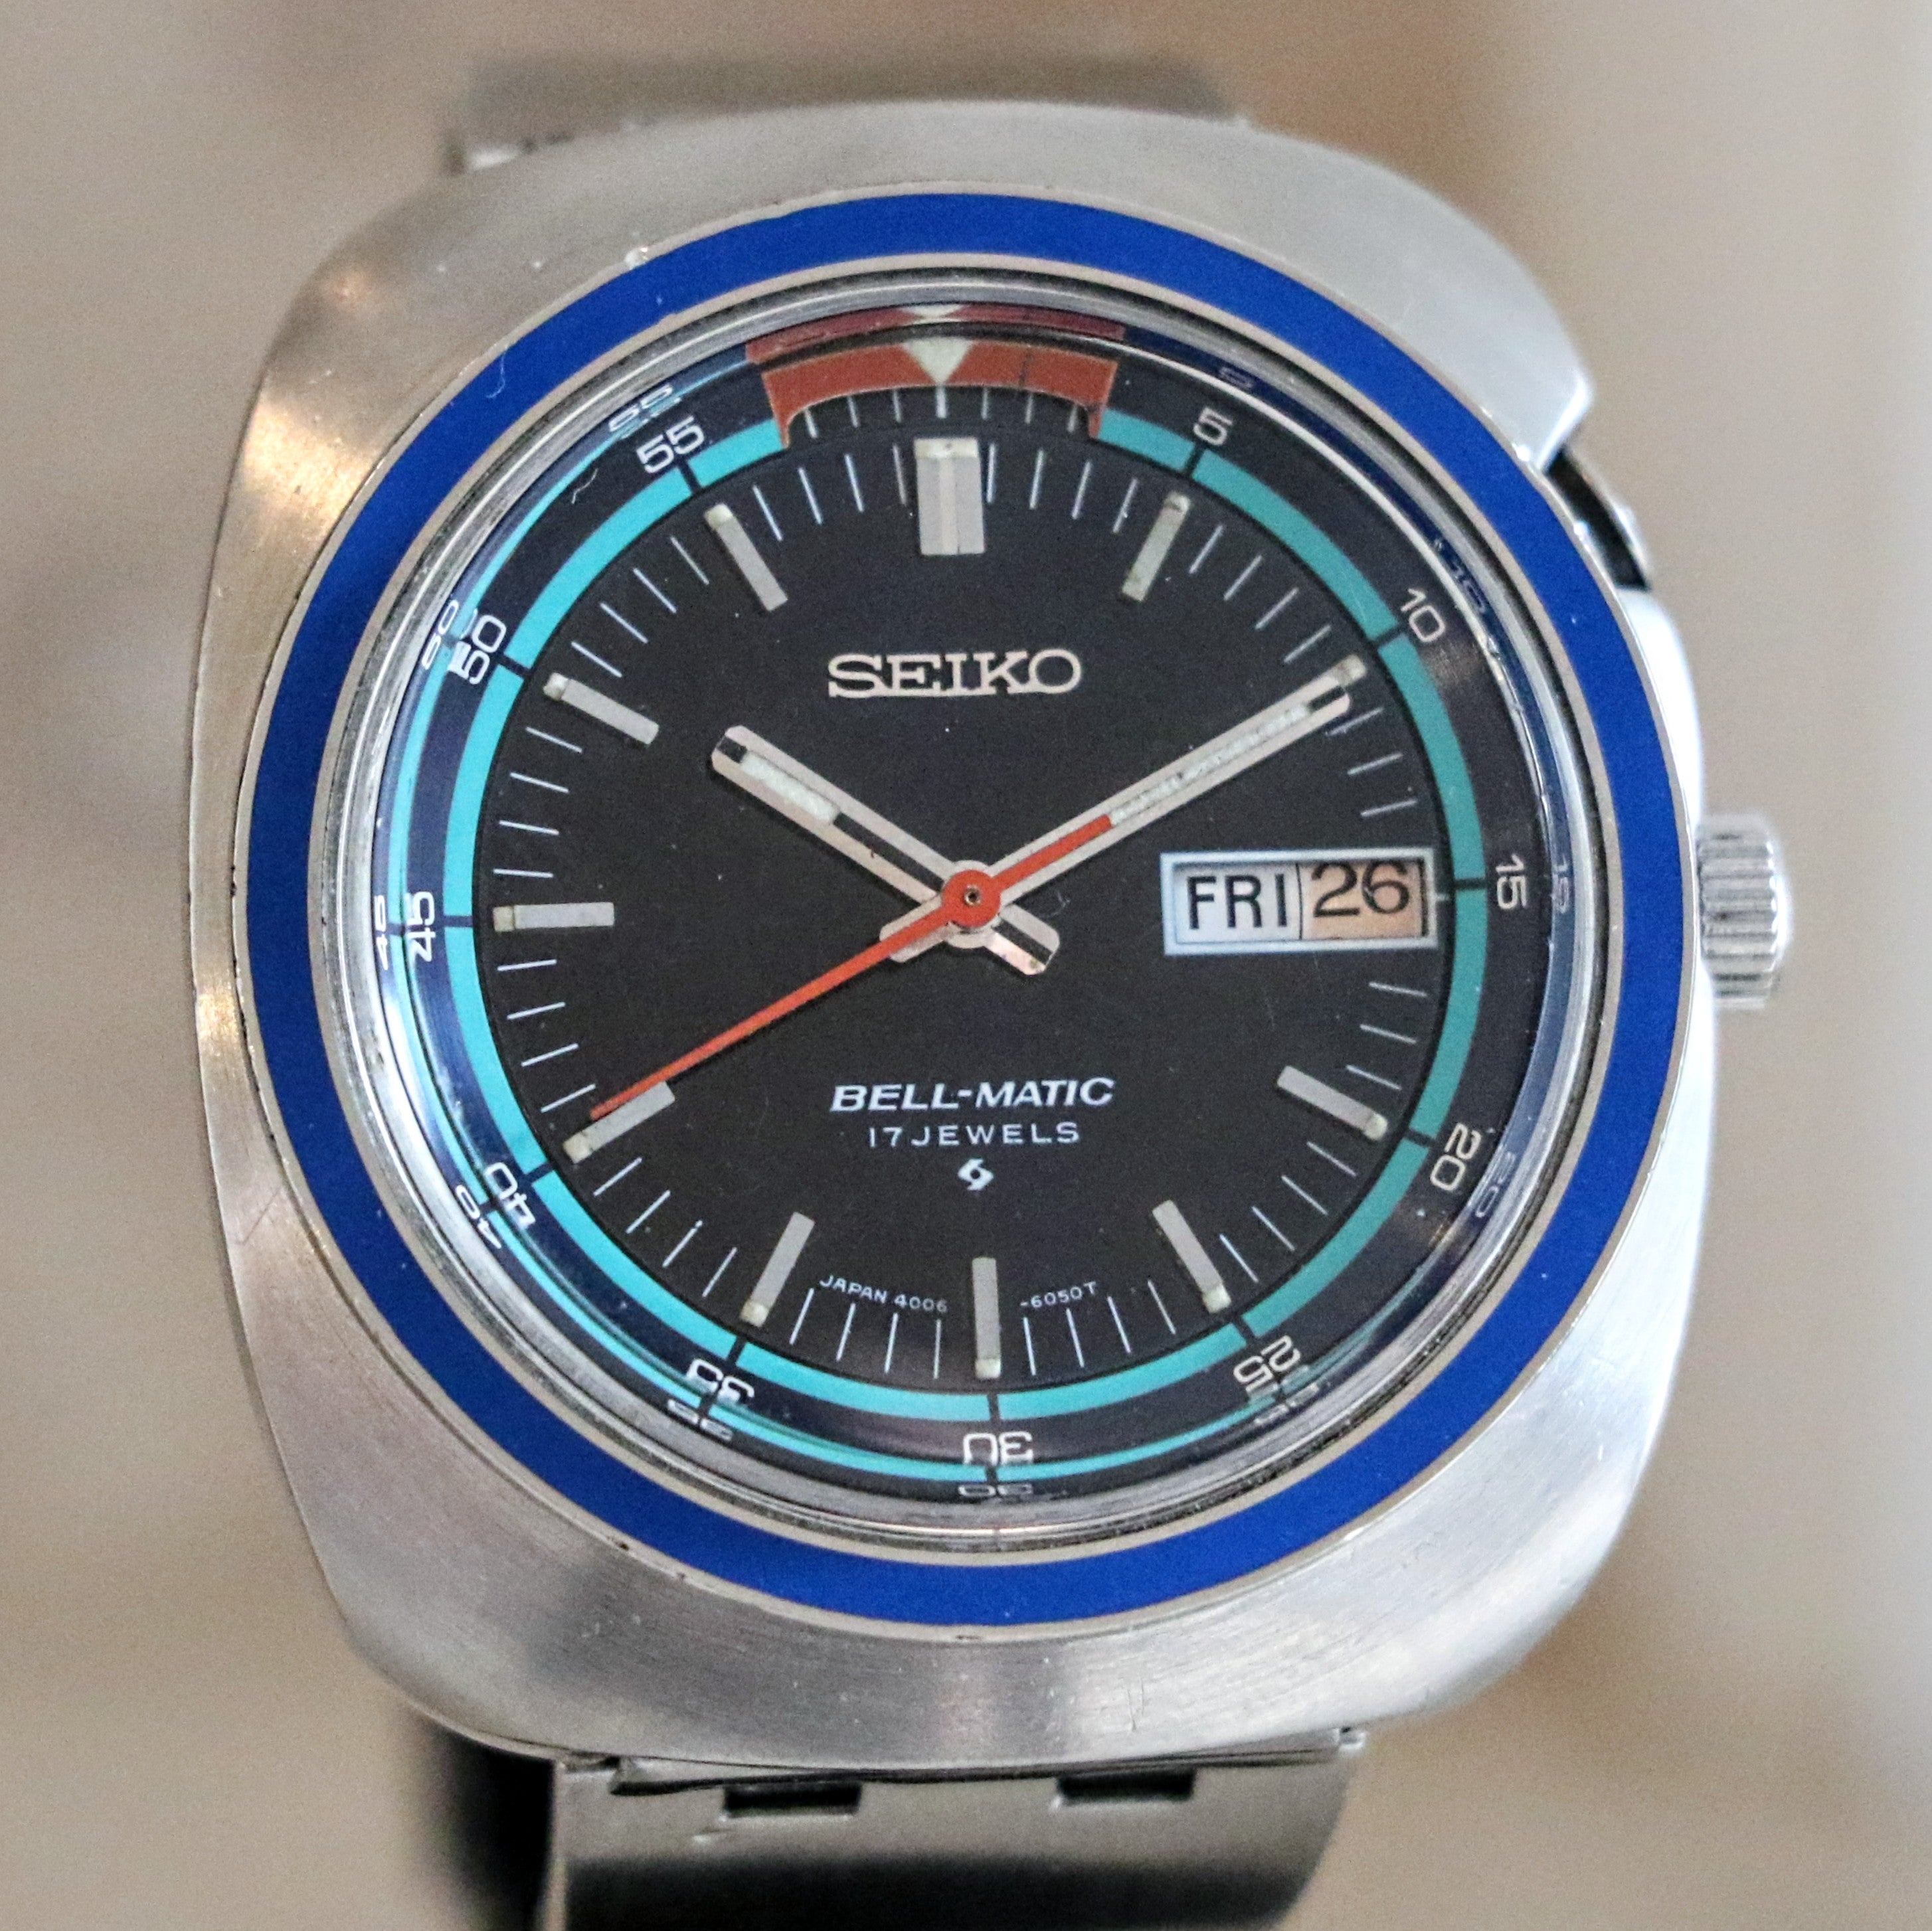 1973 SEIKO BELL-MATIC Watch Ref. 4006-6027 Automatic Alarm Wristwatch Day/Date Indicator